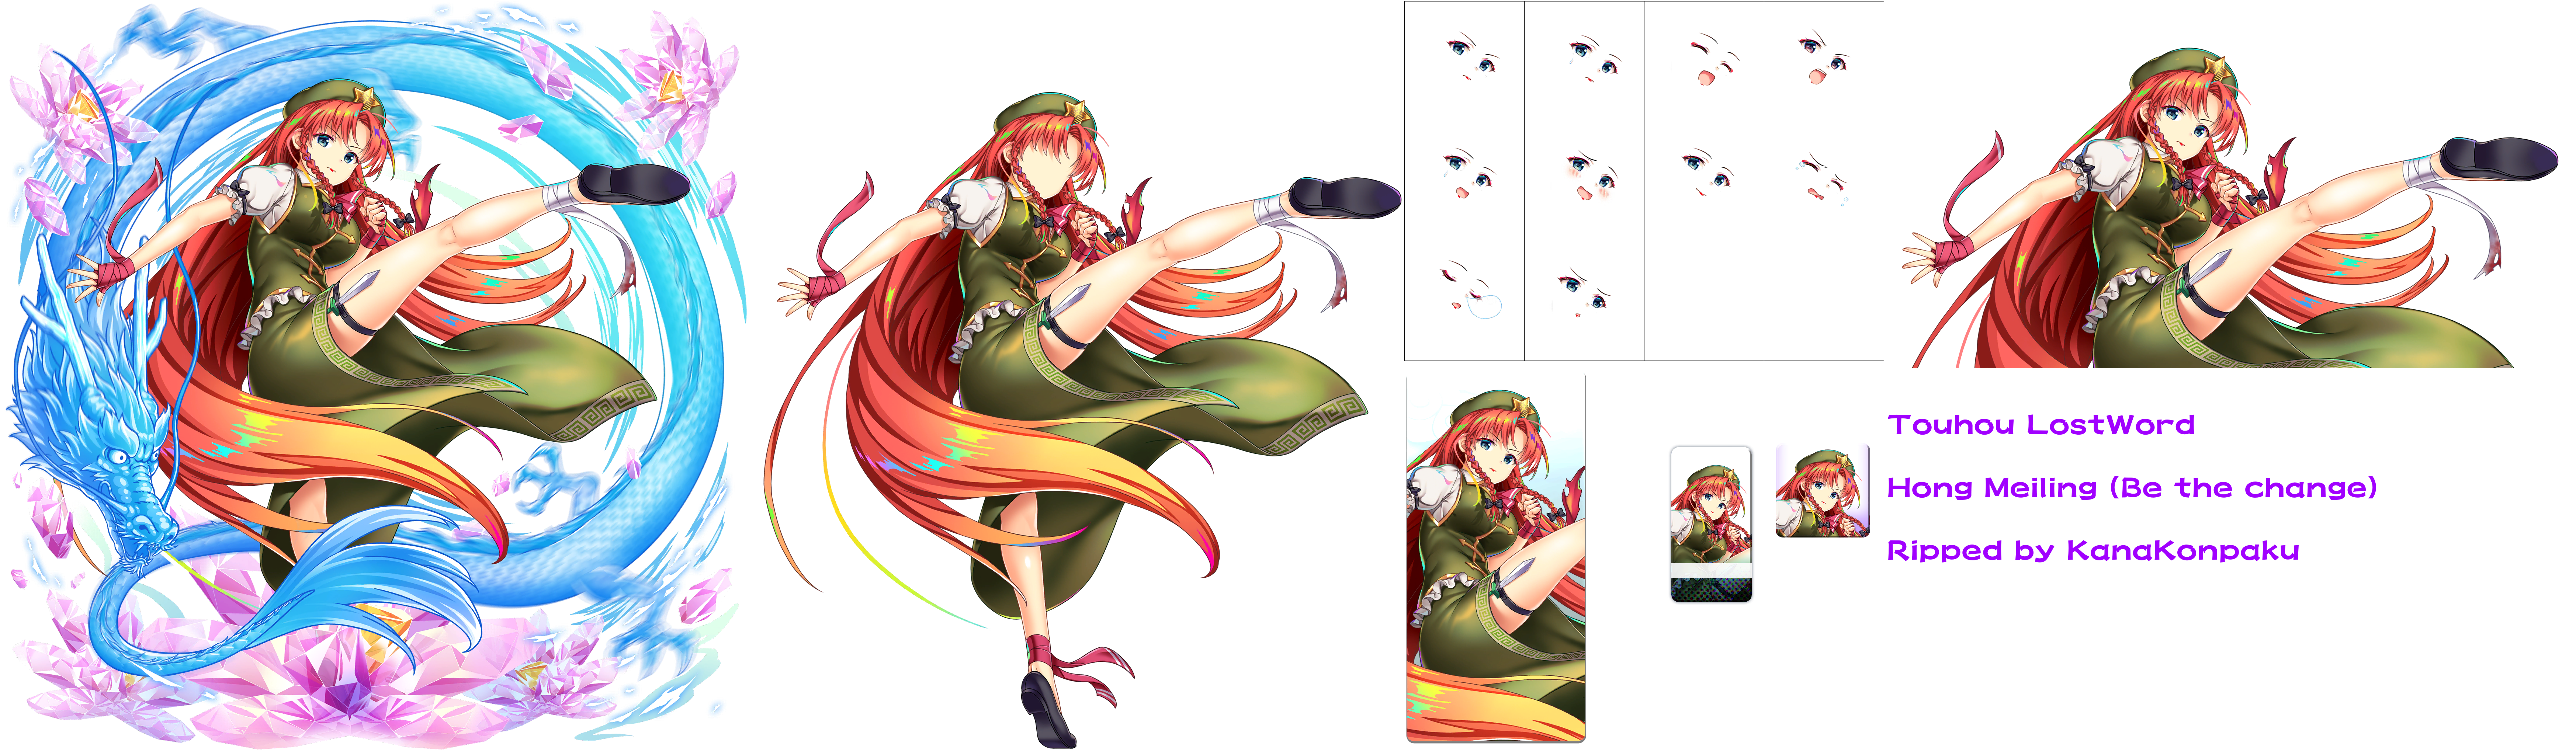 Touhou LostWord - Hong Meiling (Be the change)